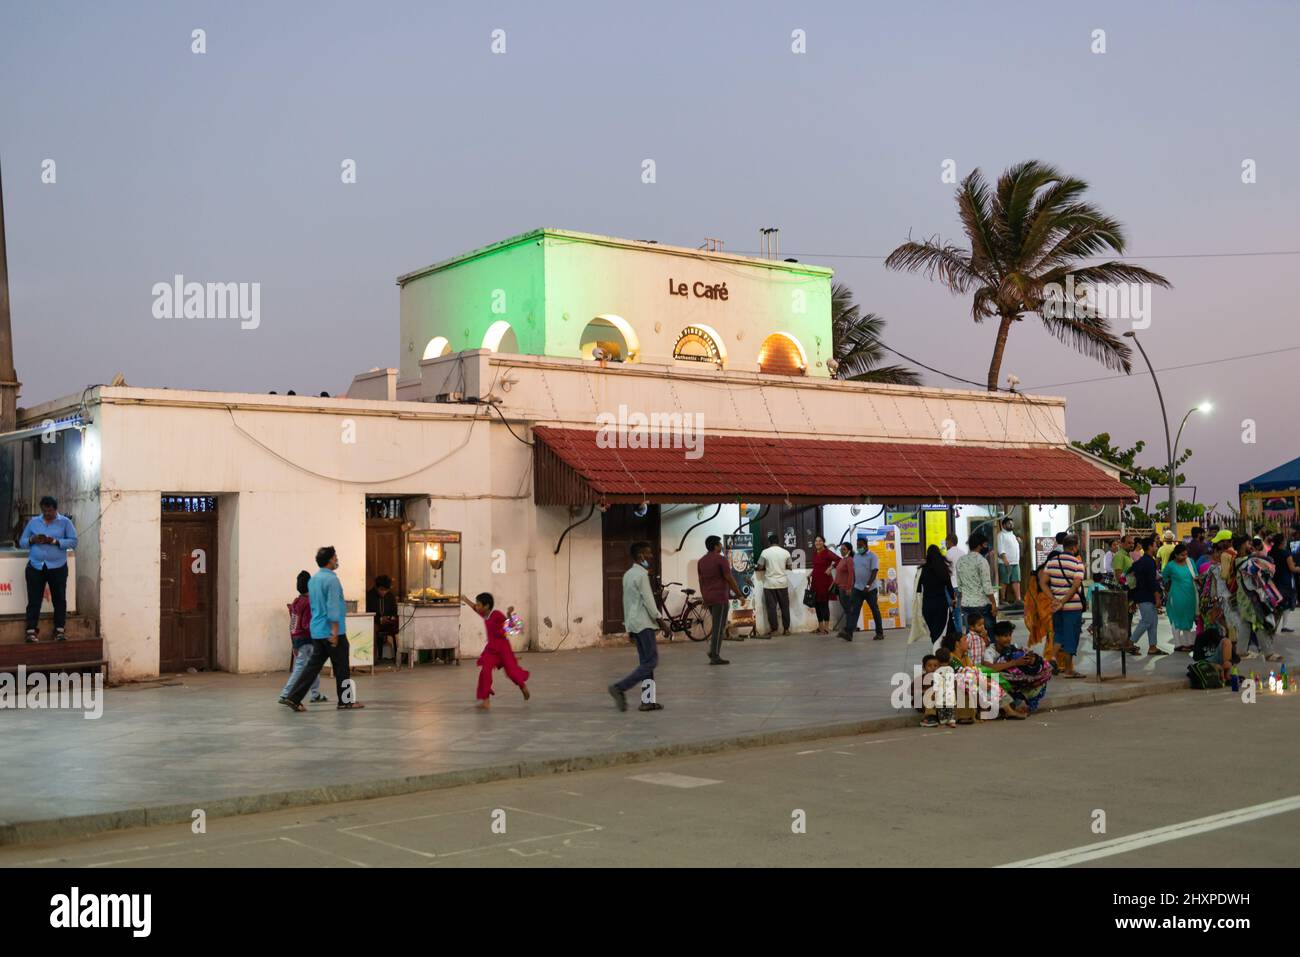 Pondicherry, India - 12 March 2022: Le cafe on the Promenade by the sea Stock Photo